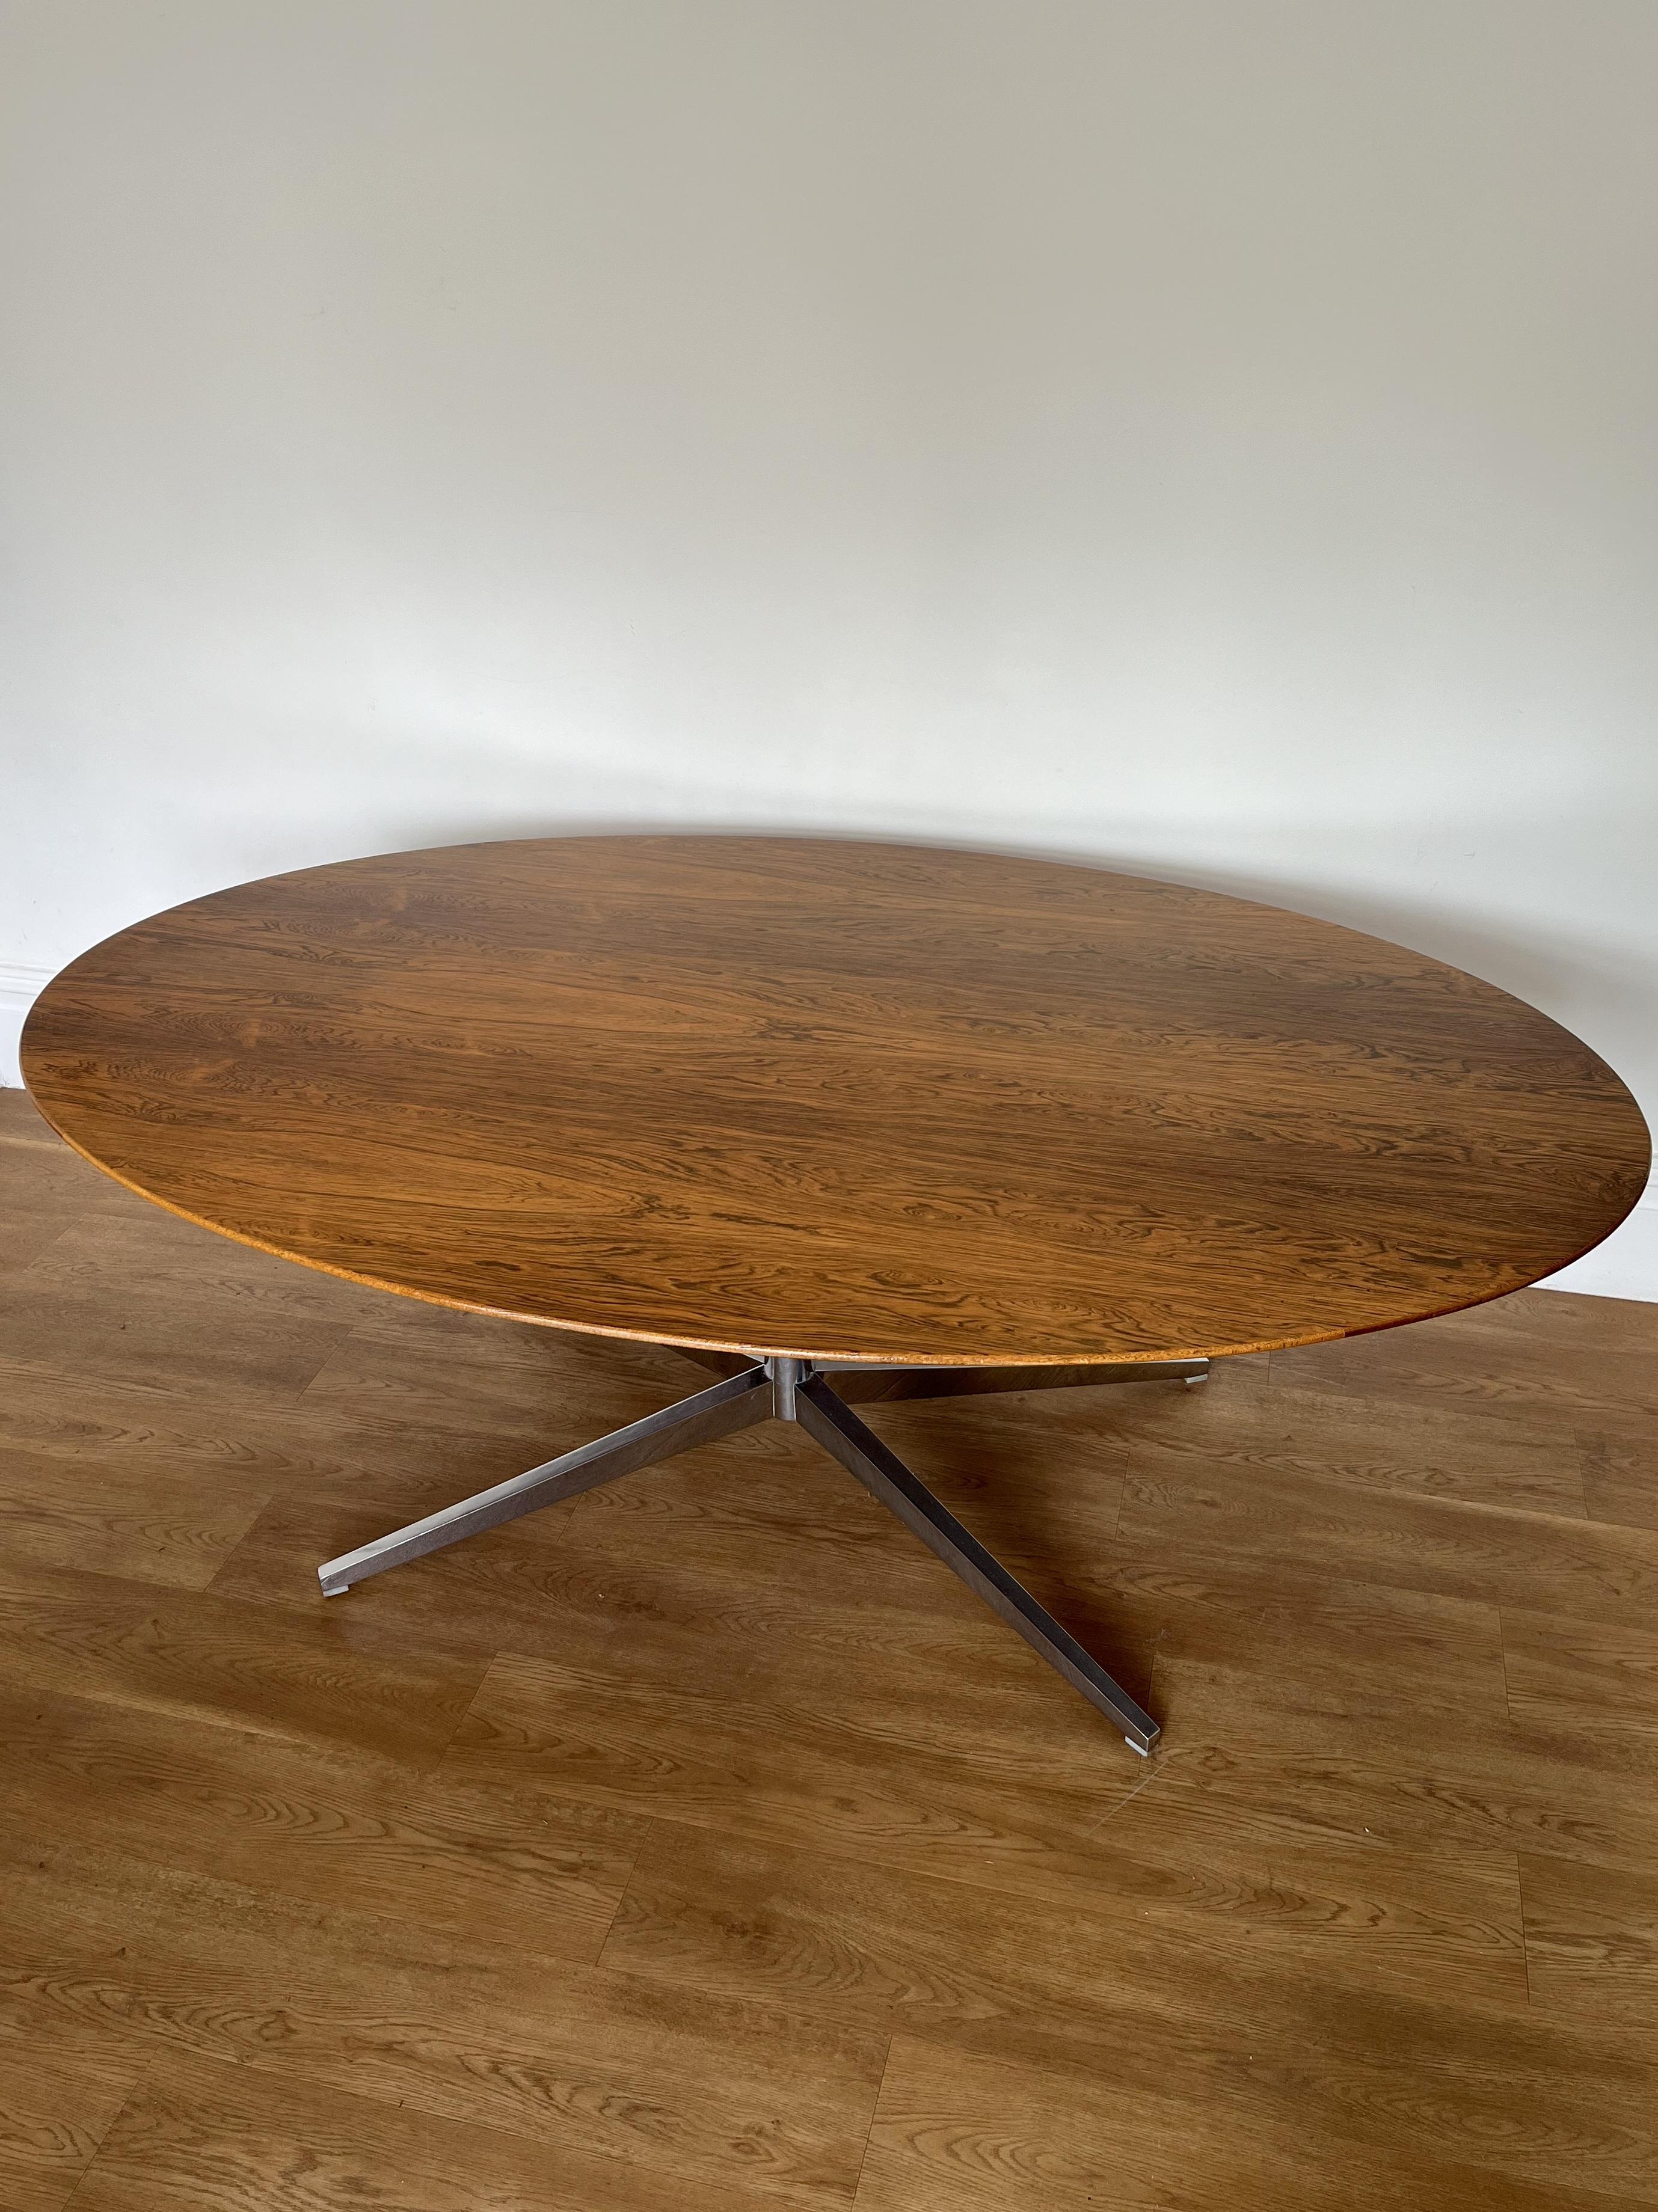 Large Florence knoll oval rosewood table.

The table is in very good original condition and presents really well. There are a few small knocks to the edges and scuffs and scratches to the base. The top is very good showing only light signs of age,